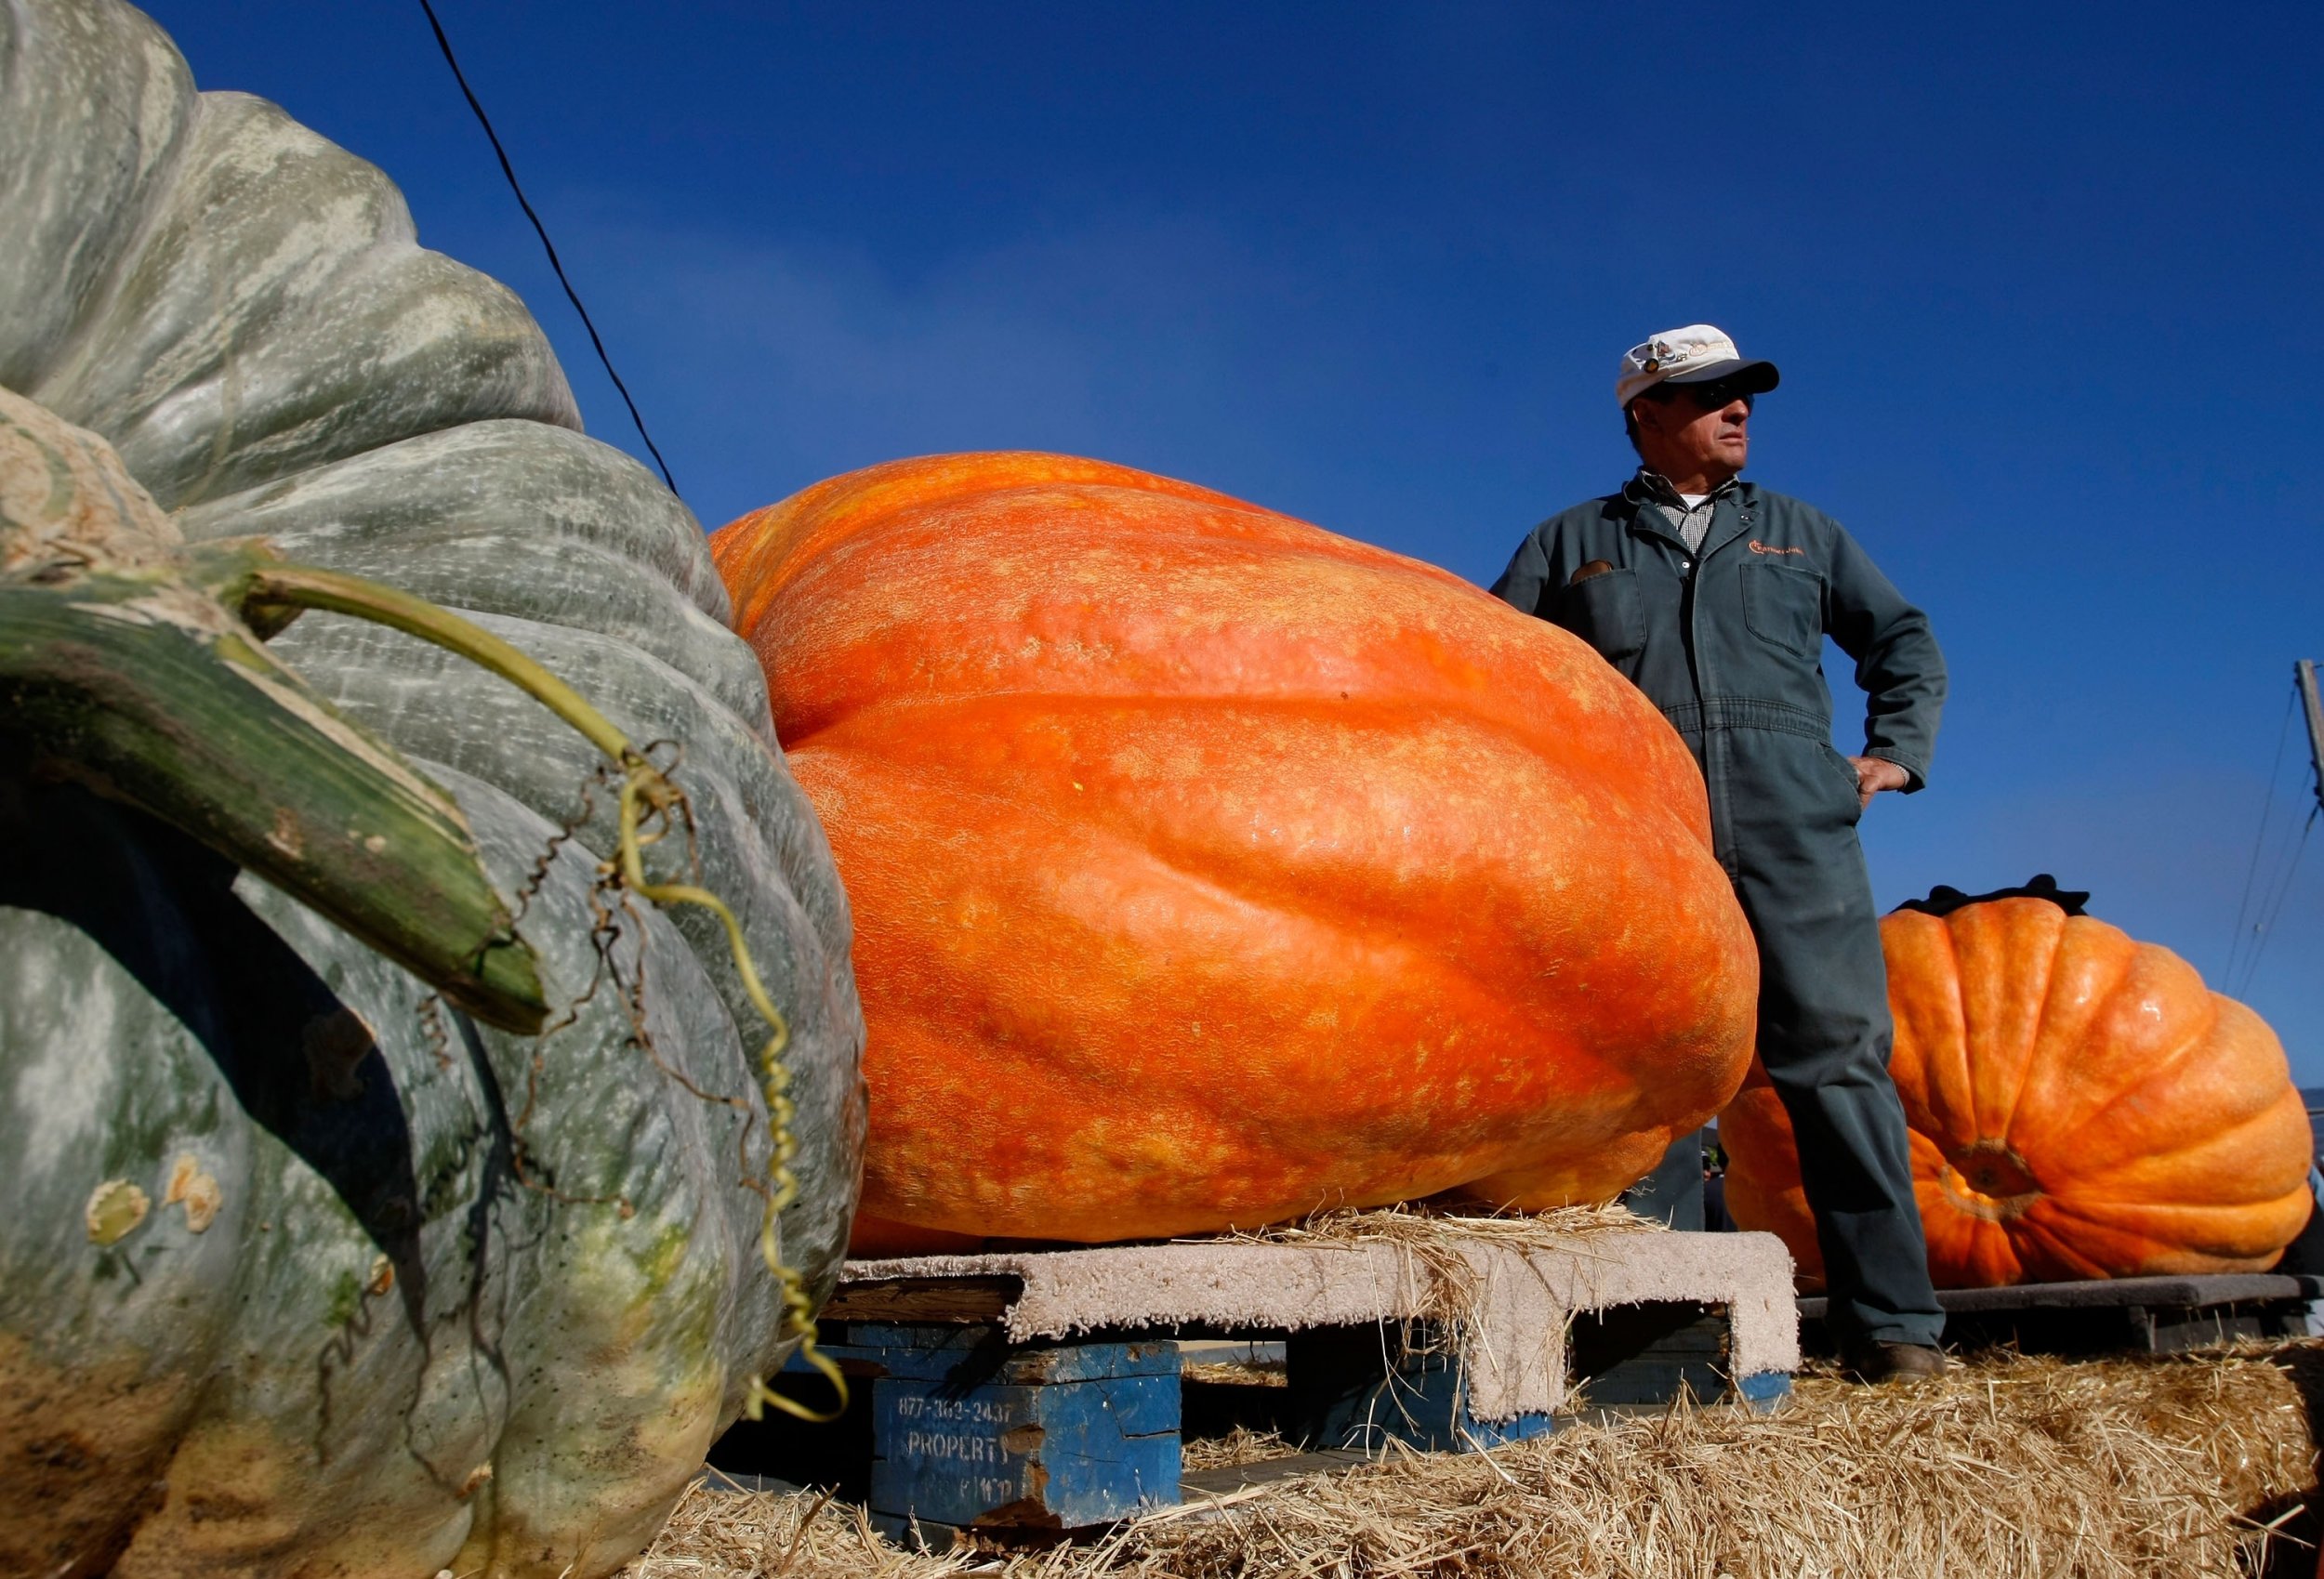 World s Largest Pumpkin 2017 Is This 2 222 Pound Gourd From Belgium 